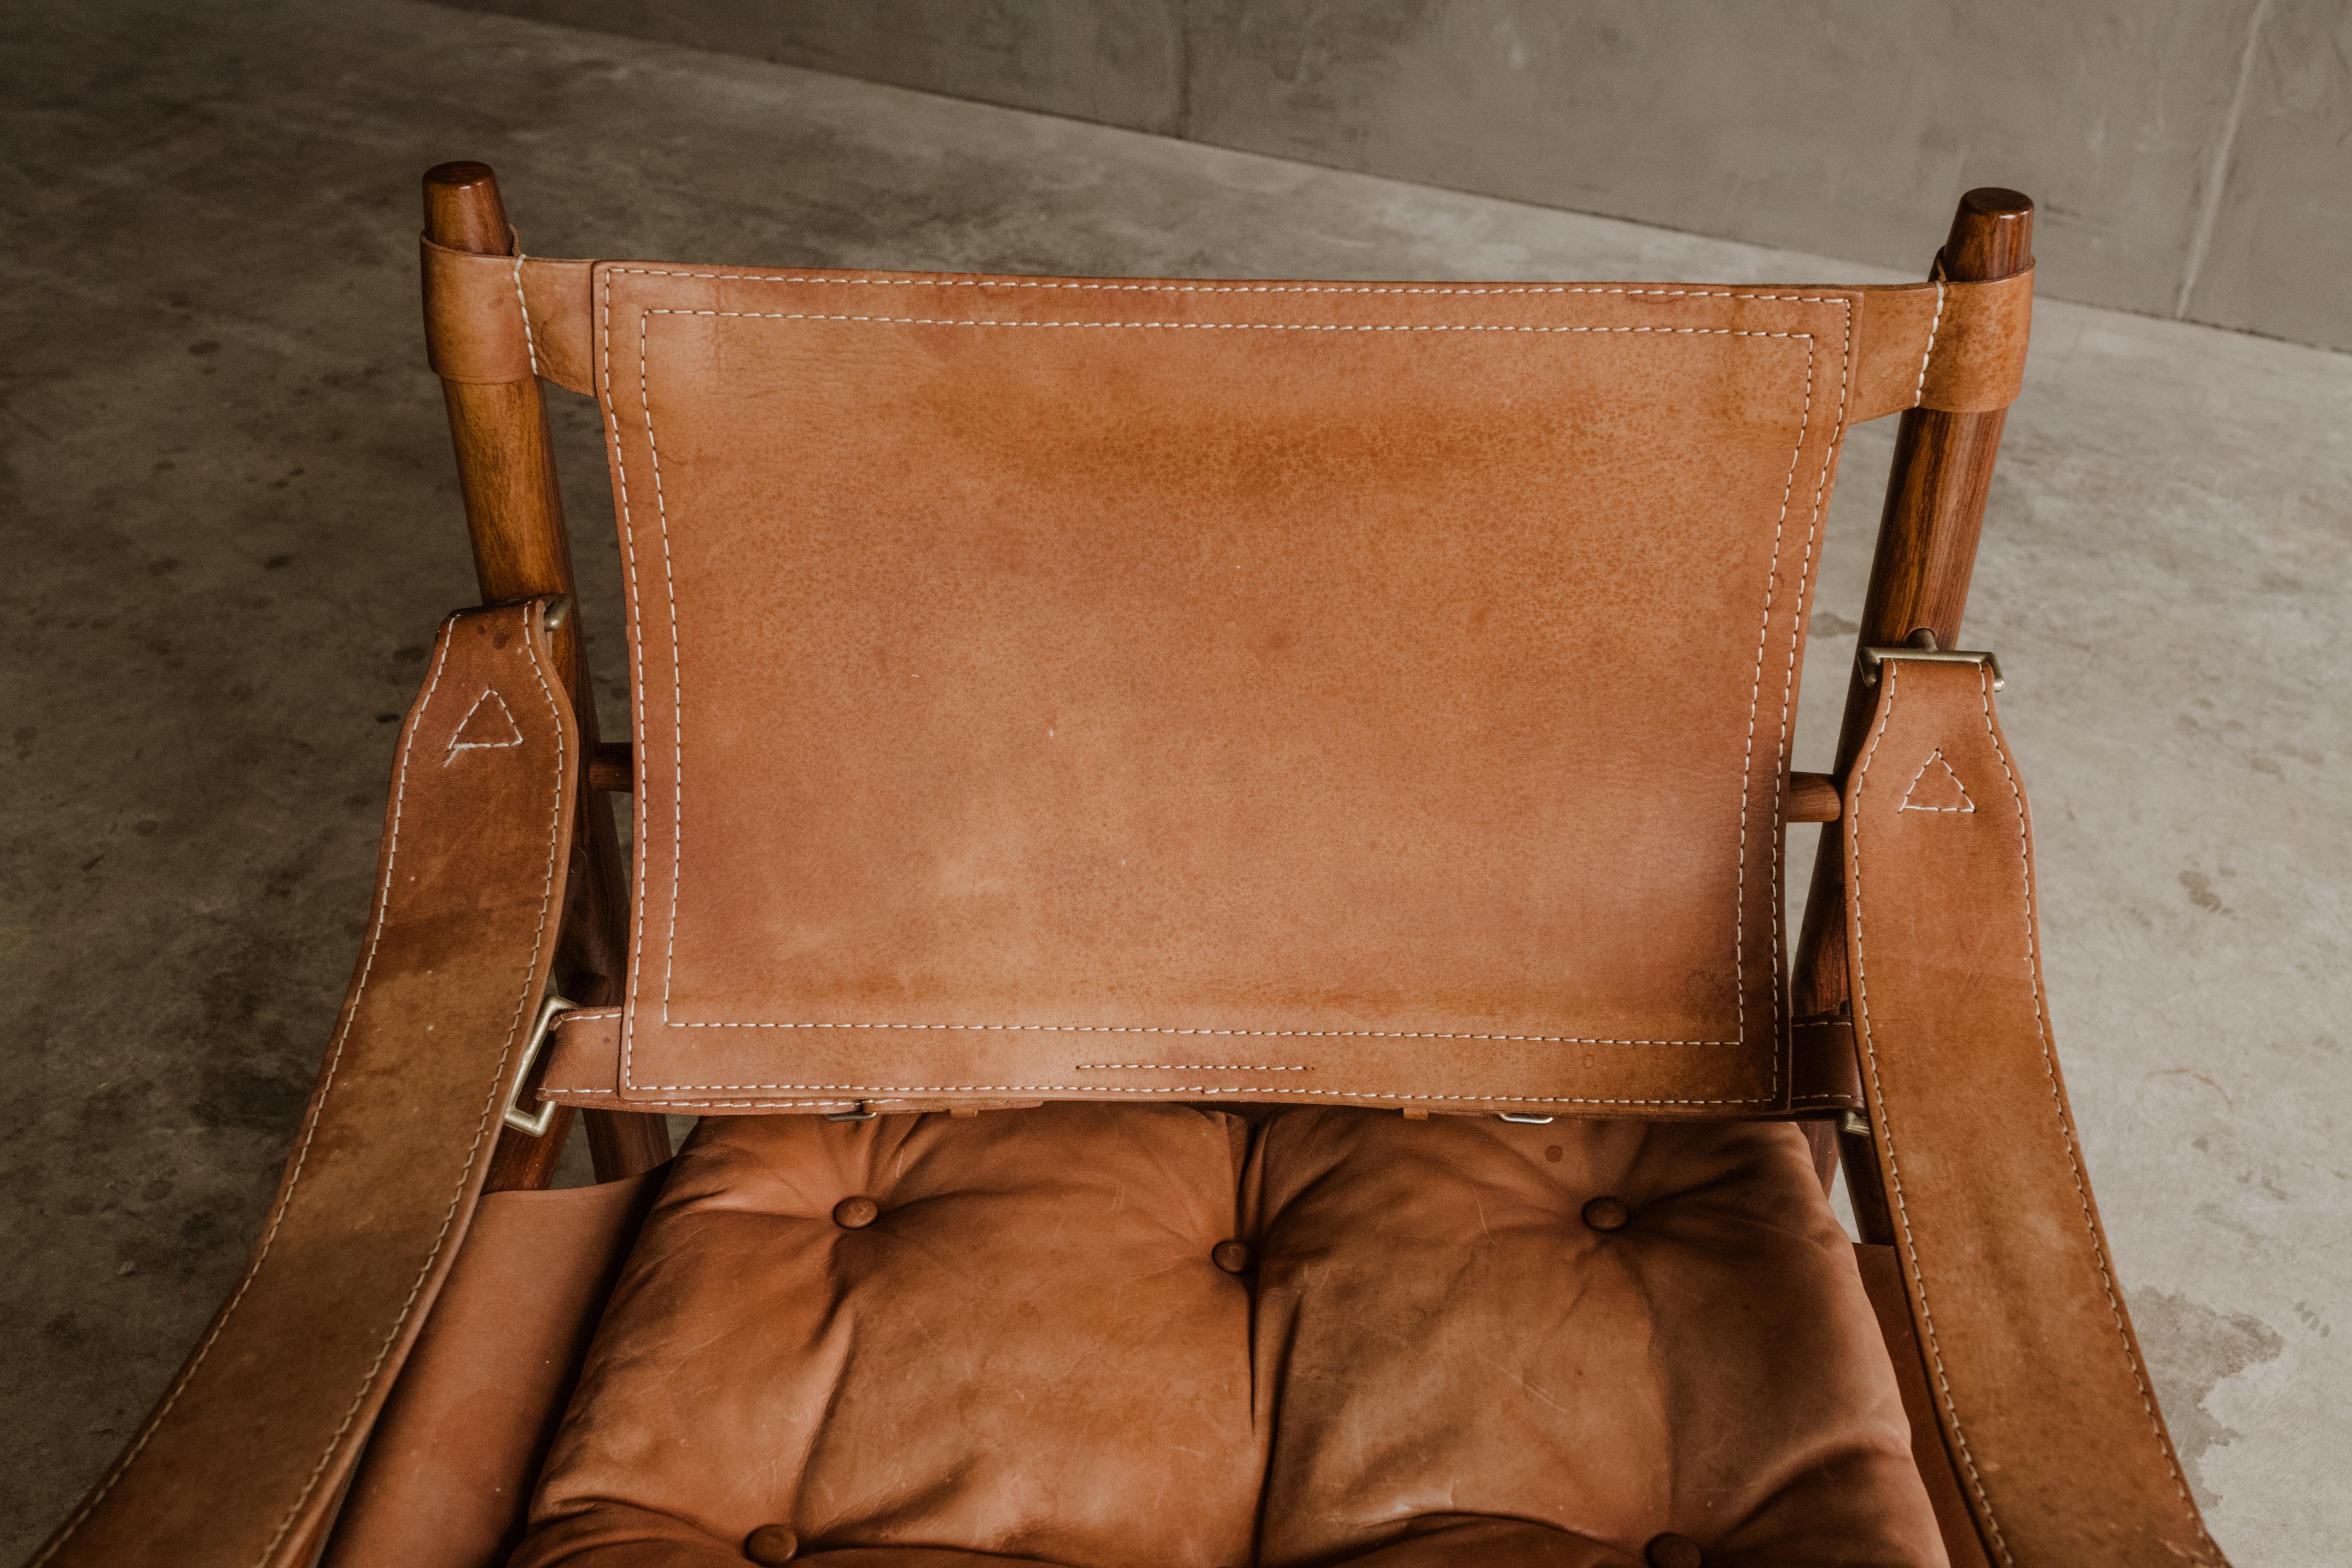 Vintage safari chair designed by Arne Norell, Sweden Circa 1970. Original Leather upholstery with nice wear and patina. Produced by Arne Norell AB, Aneby Sweden.